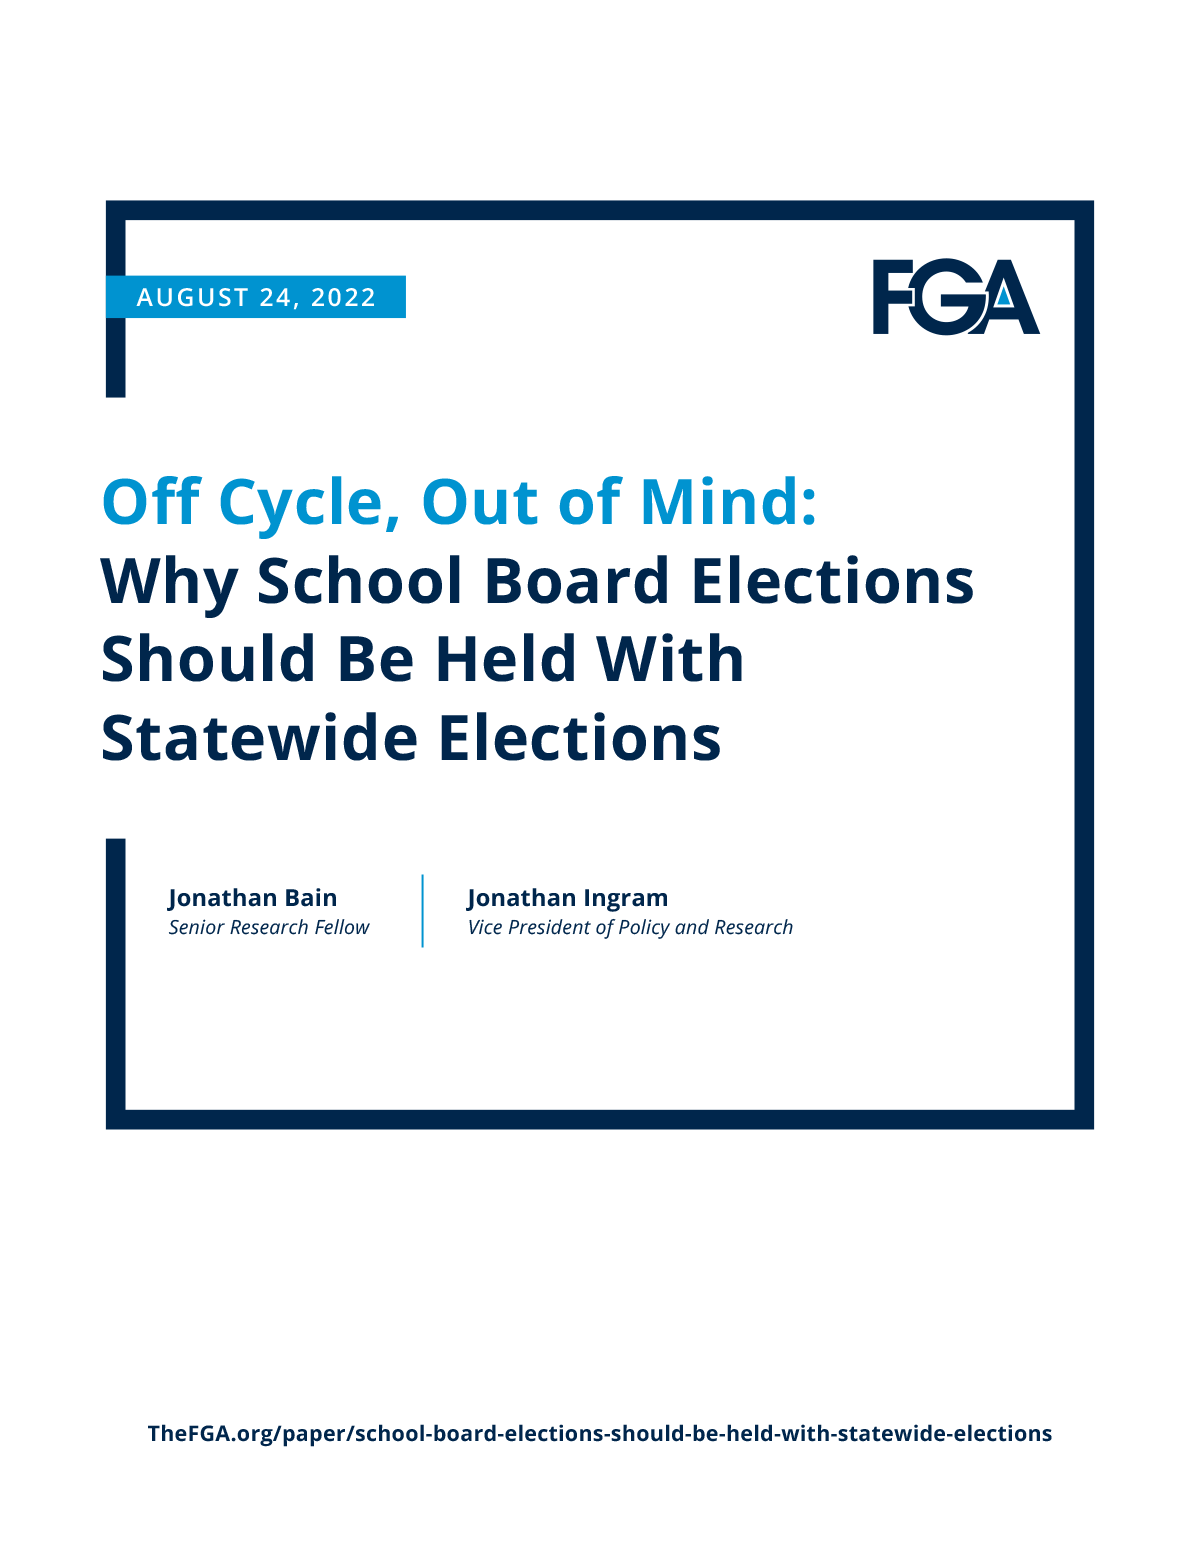 Off Cycle, Out of Mind: Why School Board Elections Should Be Held With Statewide Elections